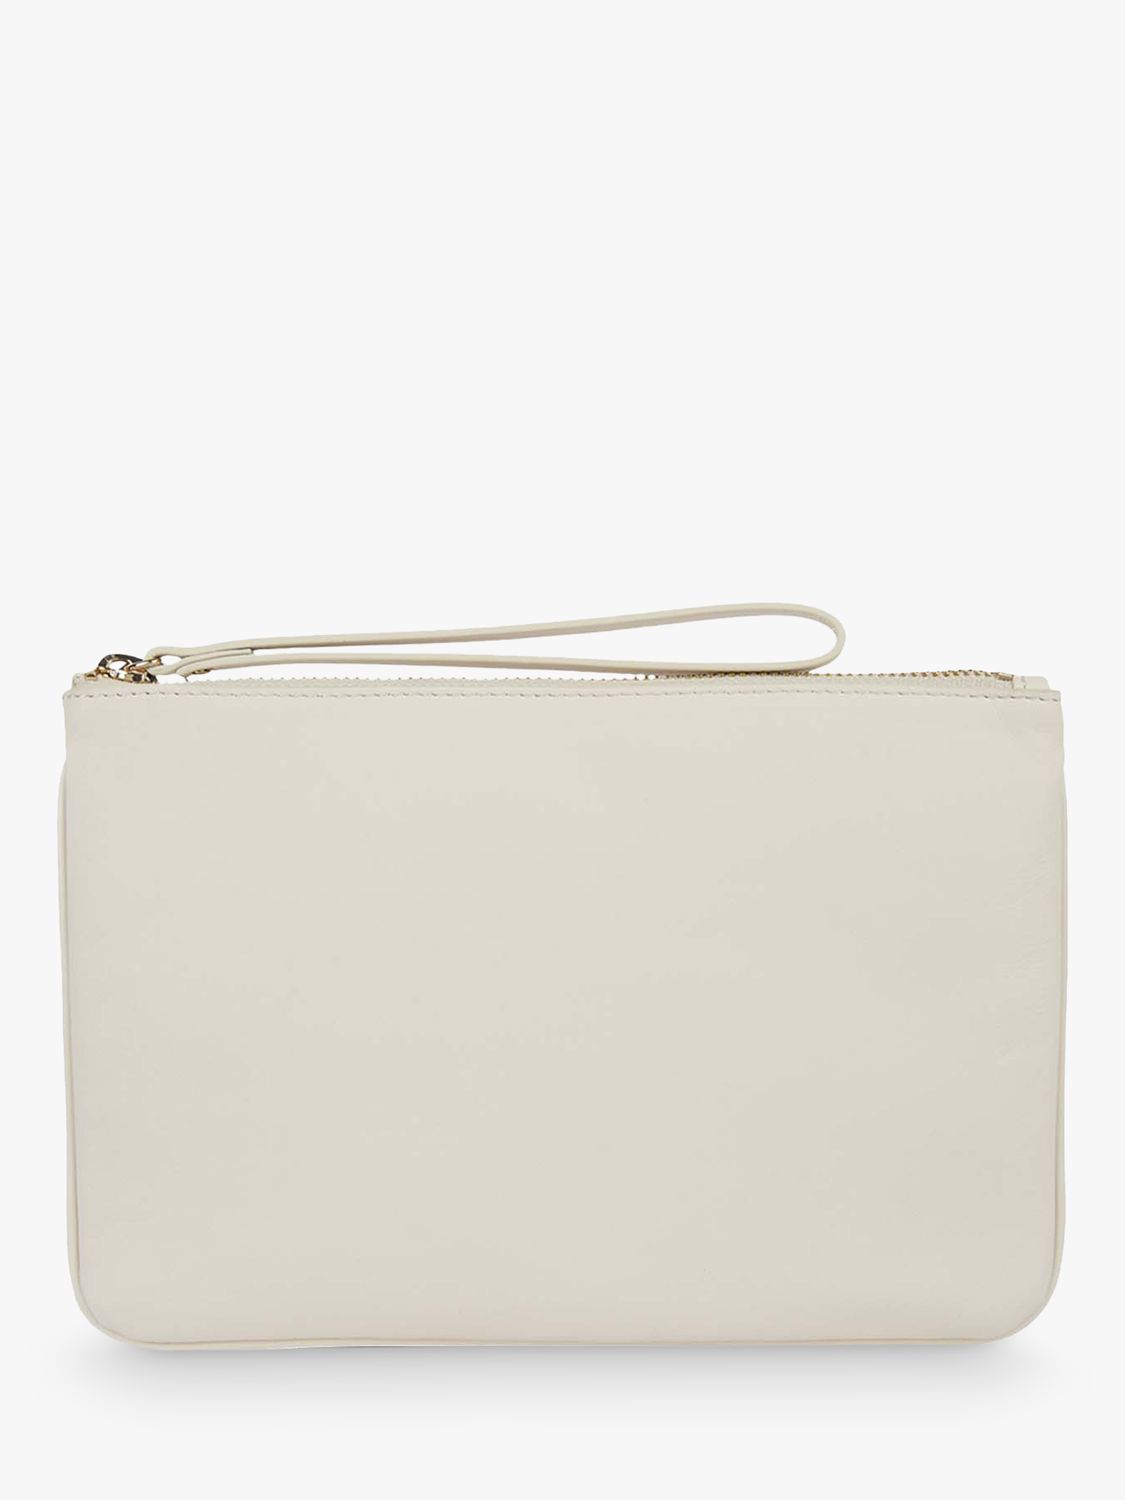 Hobbs Chelsea Leather Wristlet Clutch Bag, Ice White